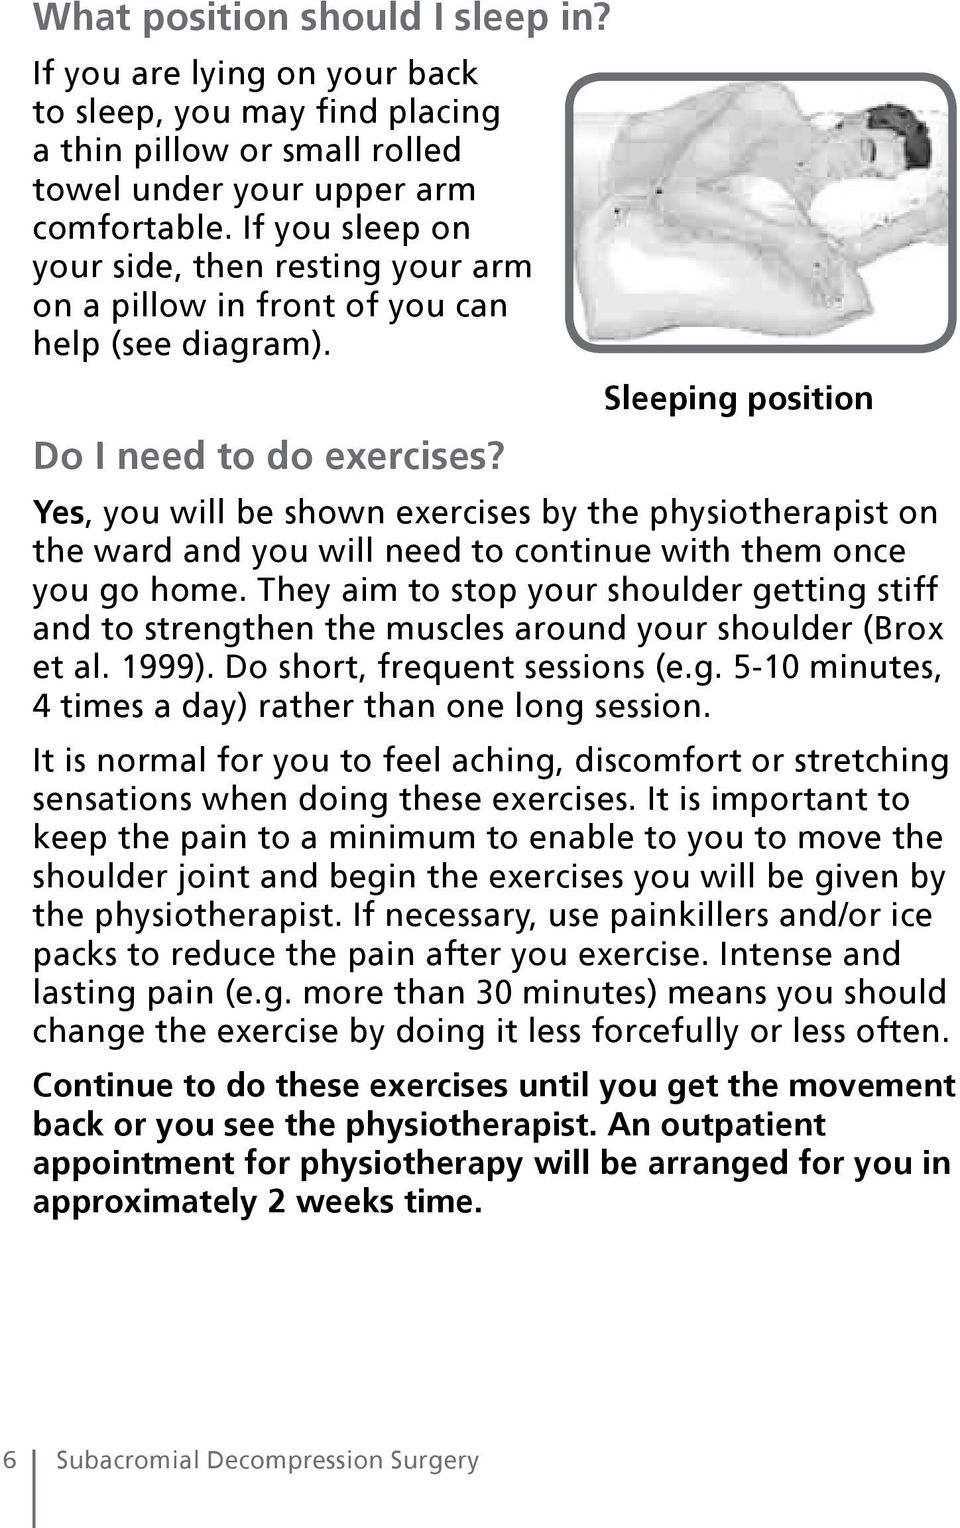 Yes, you will be shown exercises by the physiotherapist on the ward and you will need to continue with them once you go home.